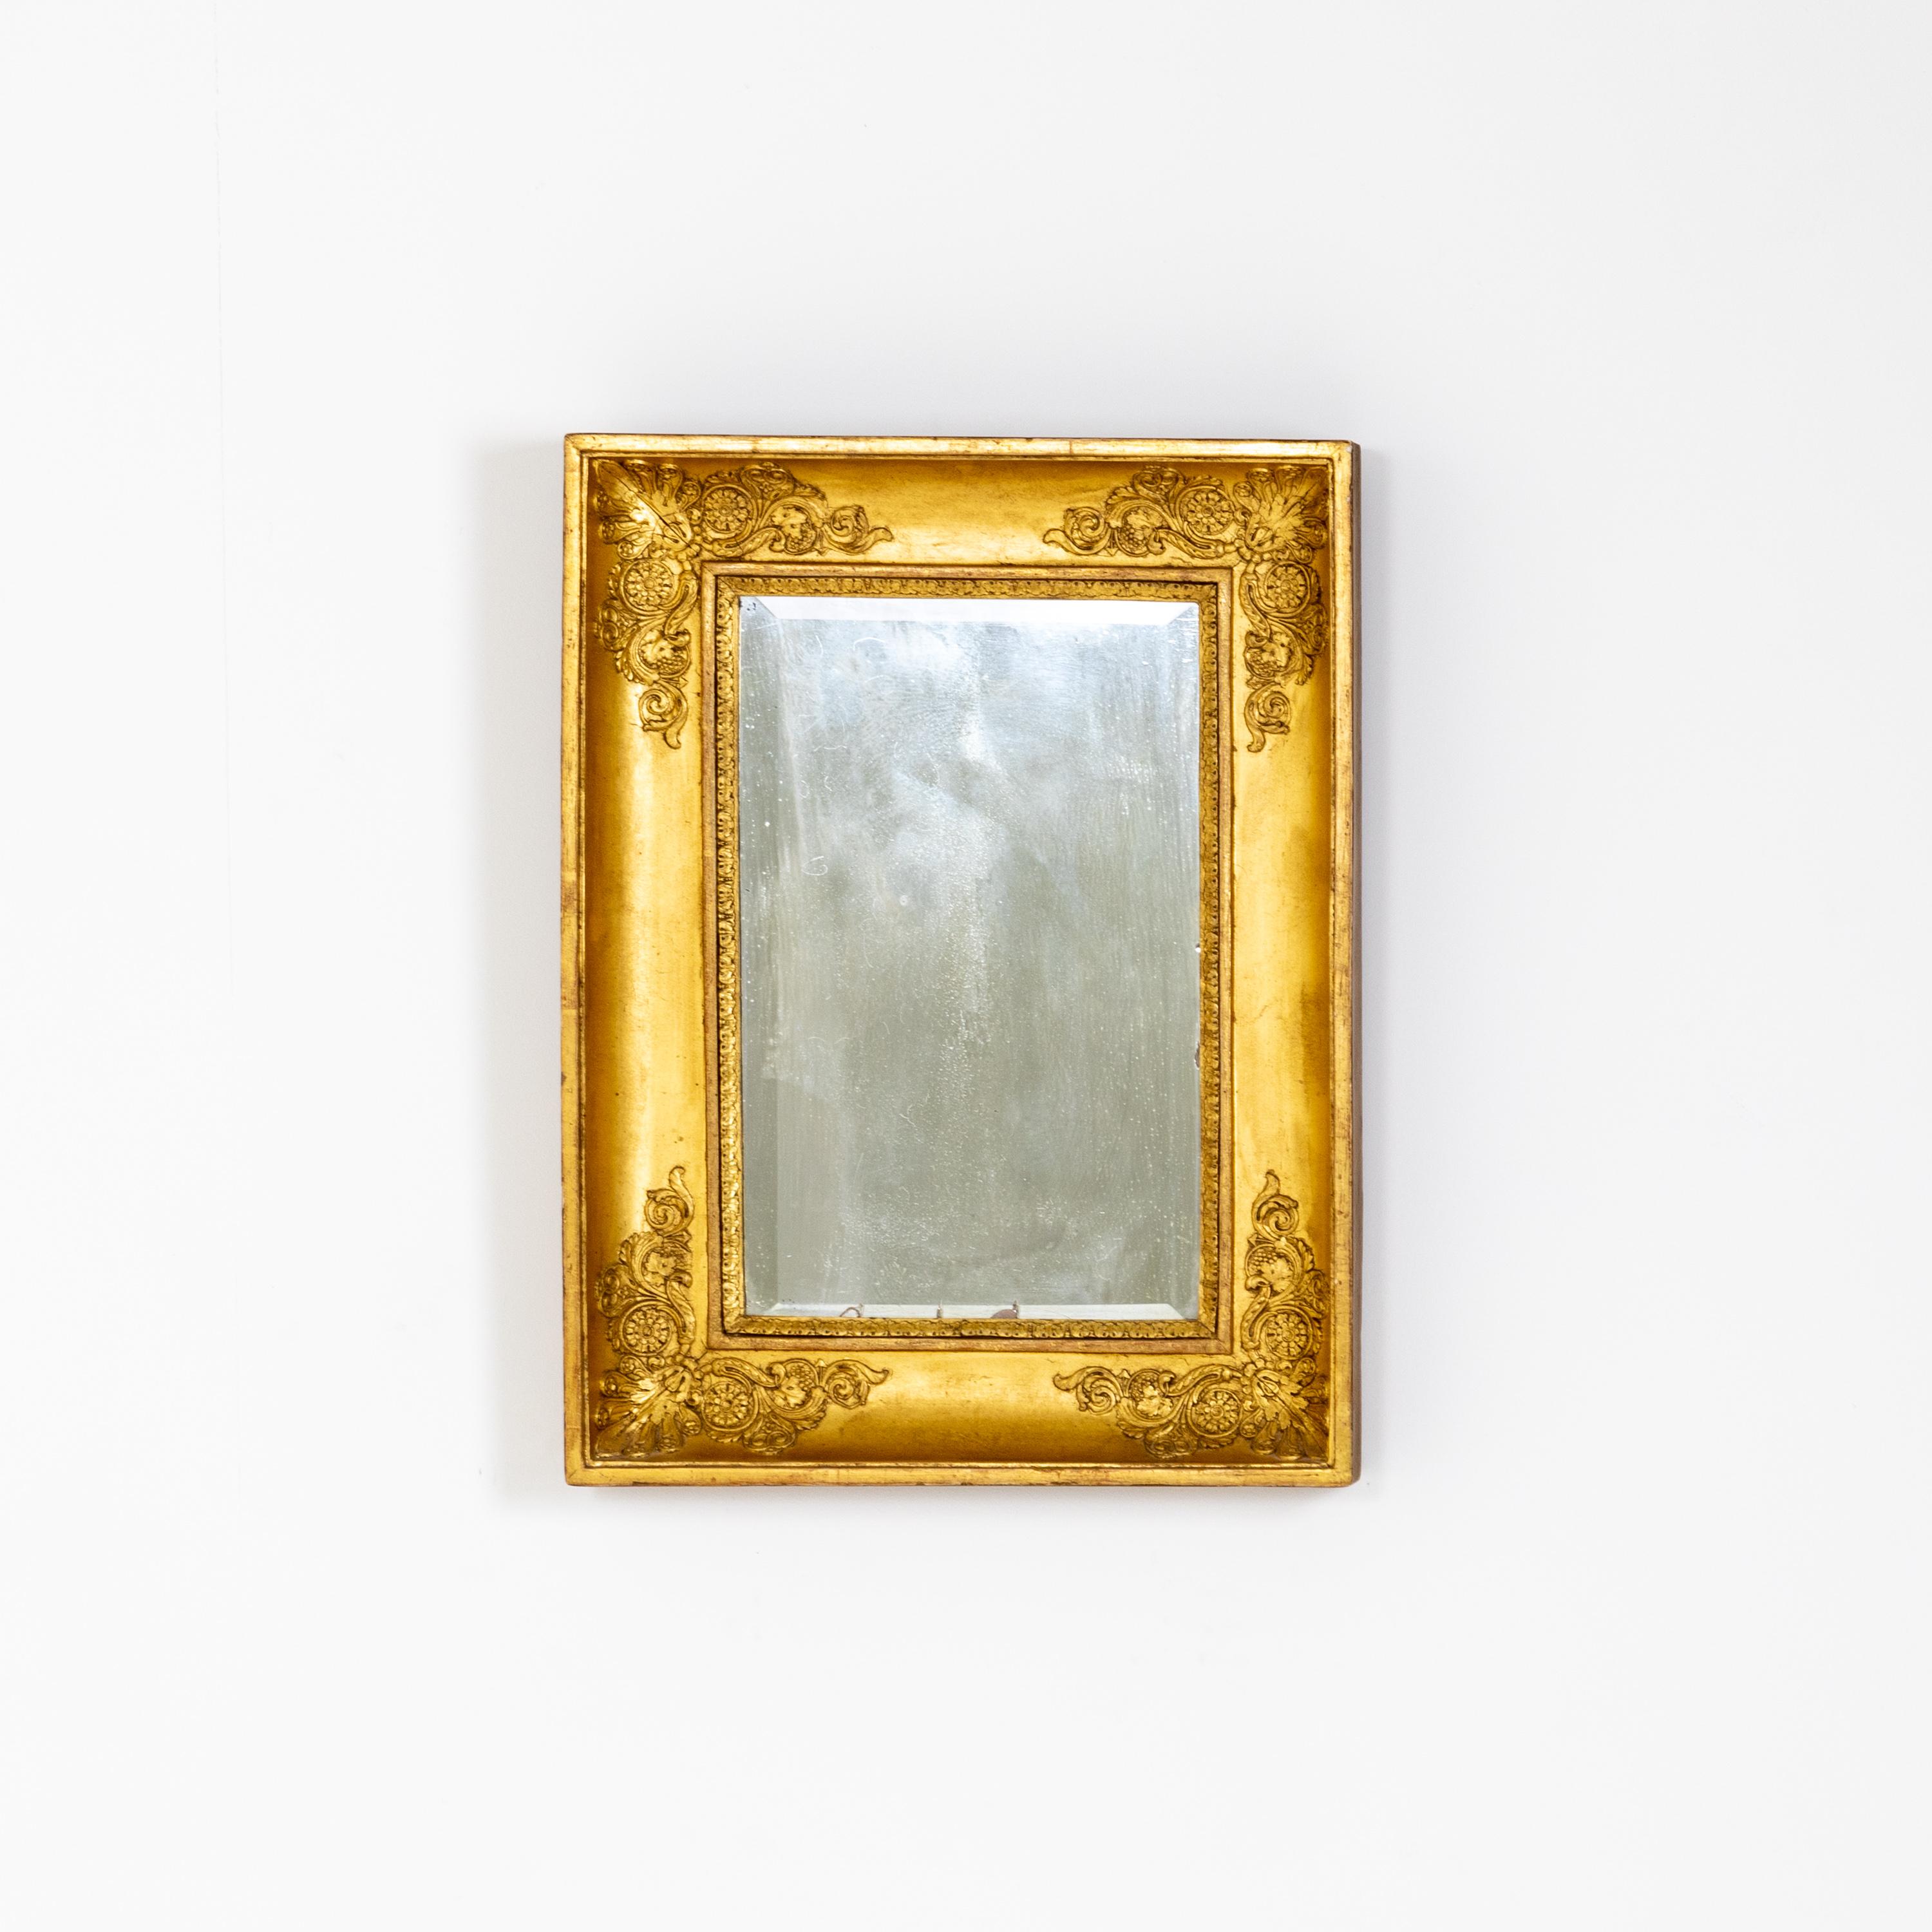 Rectangular wall mirror in giltwood with stucco accents.